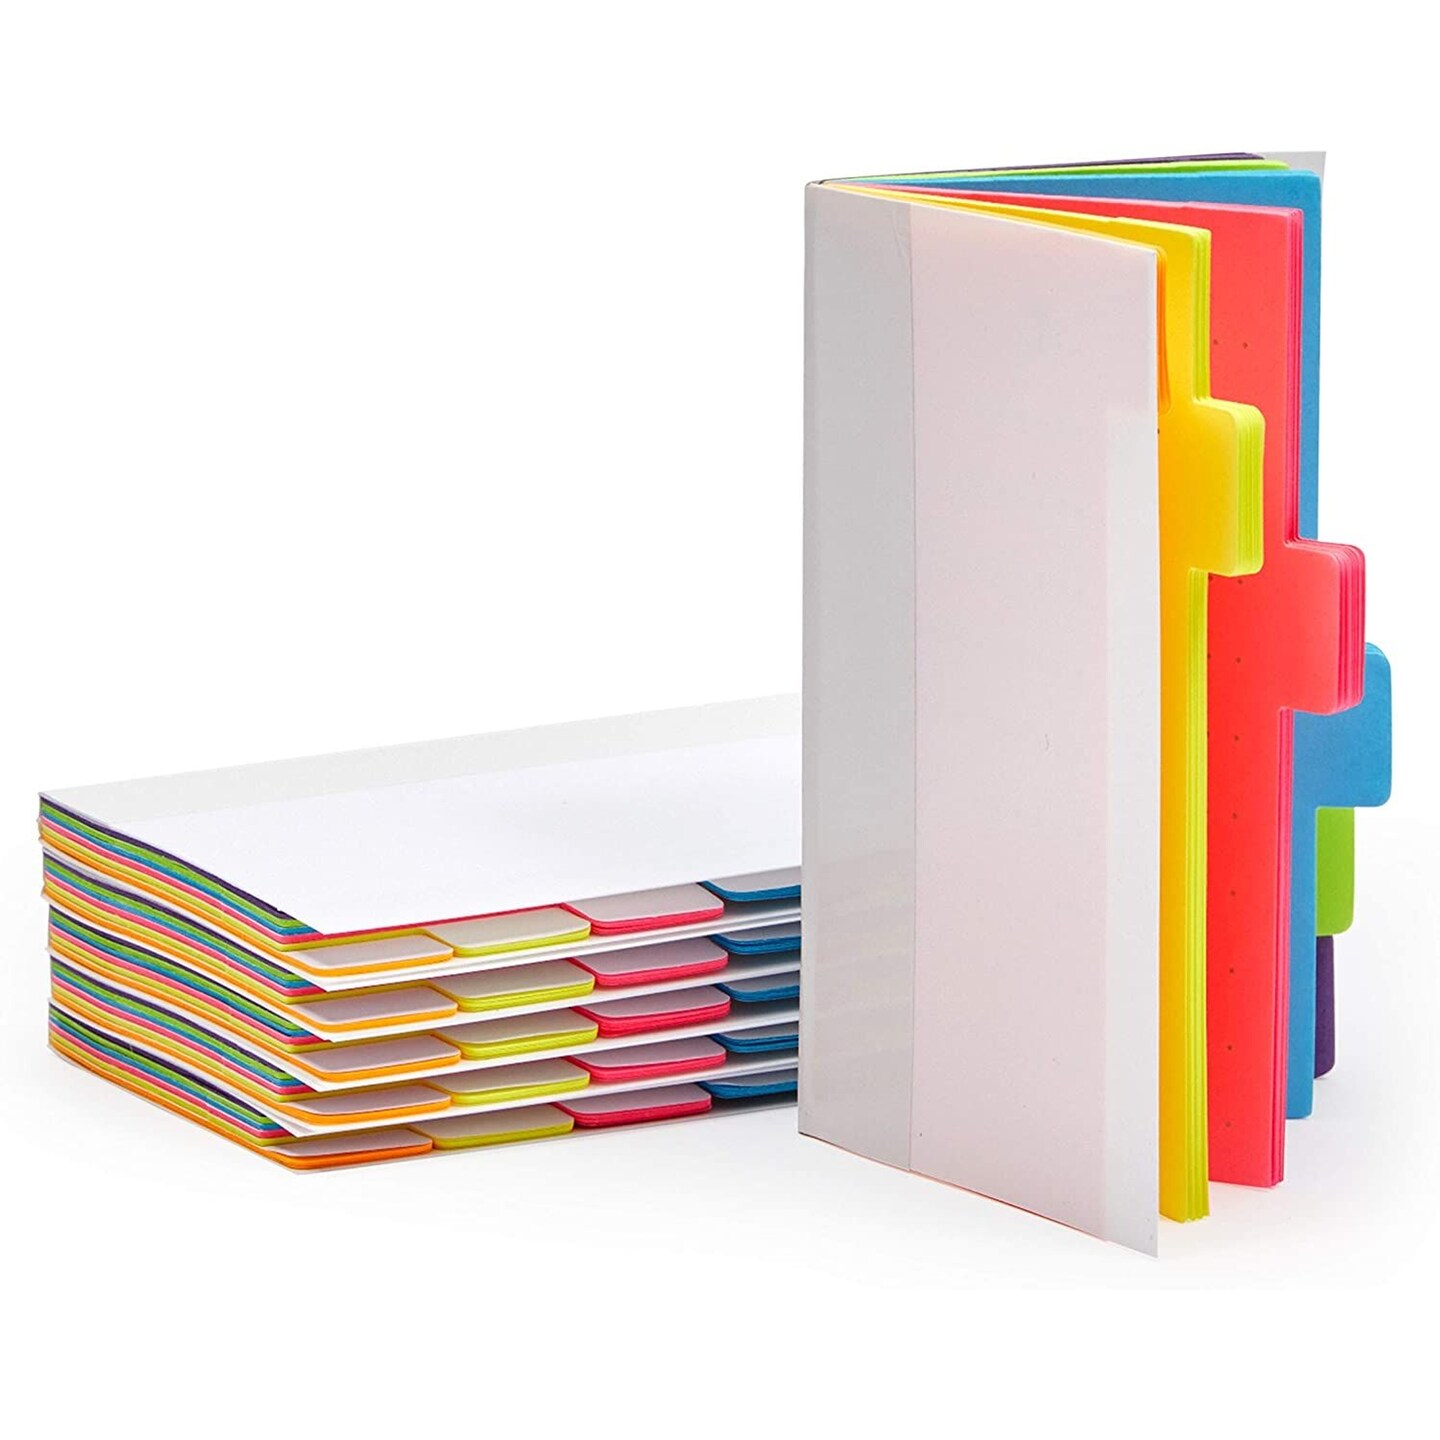 24 Pack Blank Books for Kids to Write Stories, Bulk Small Notebooks  Journals for Students, Drawing, Sketching, Unlined Pocket Size (Colorful  Covers, 4.3 x 5.6 In) 